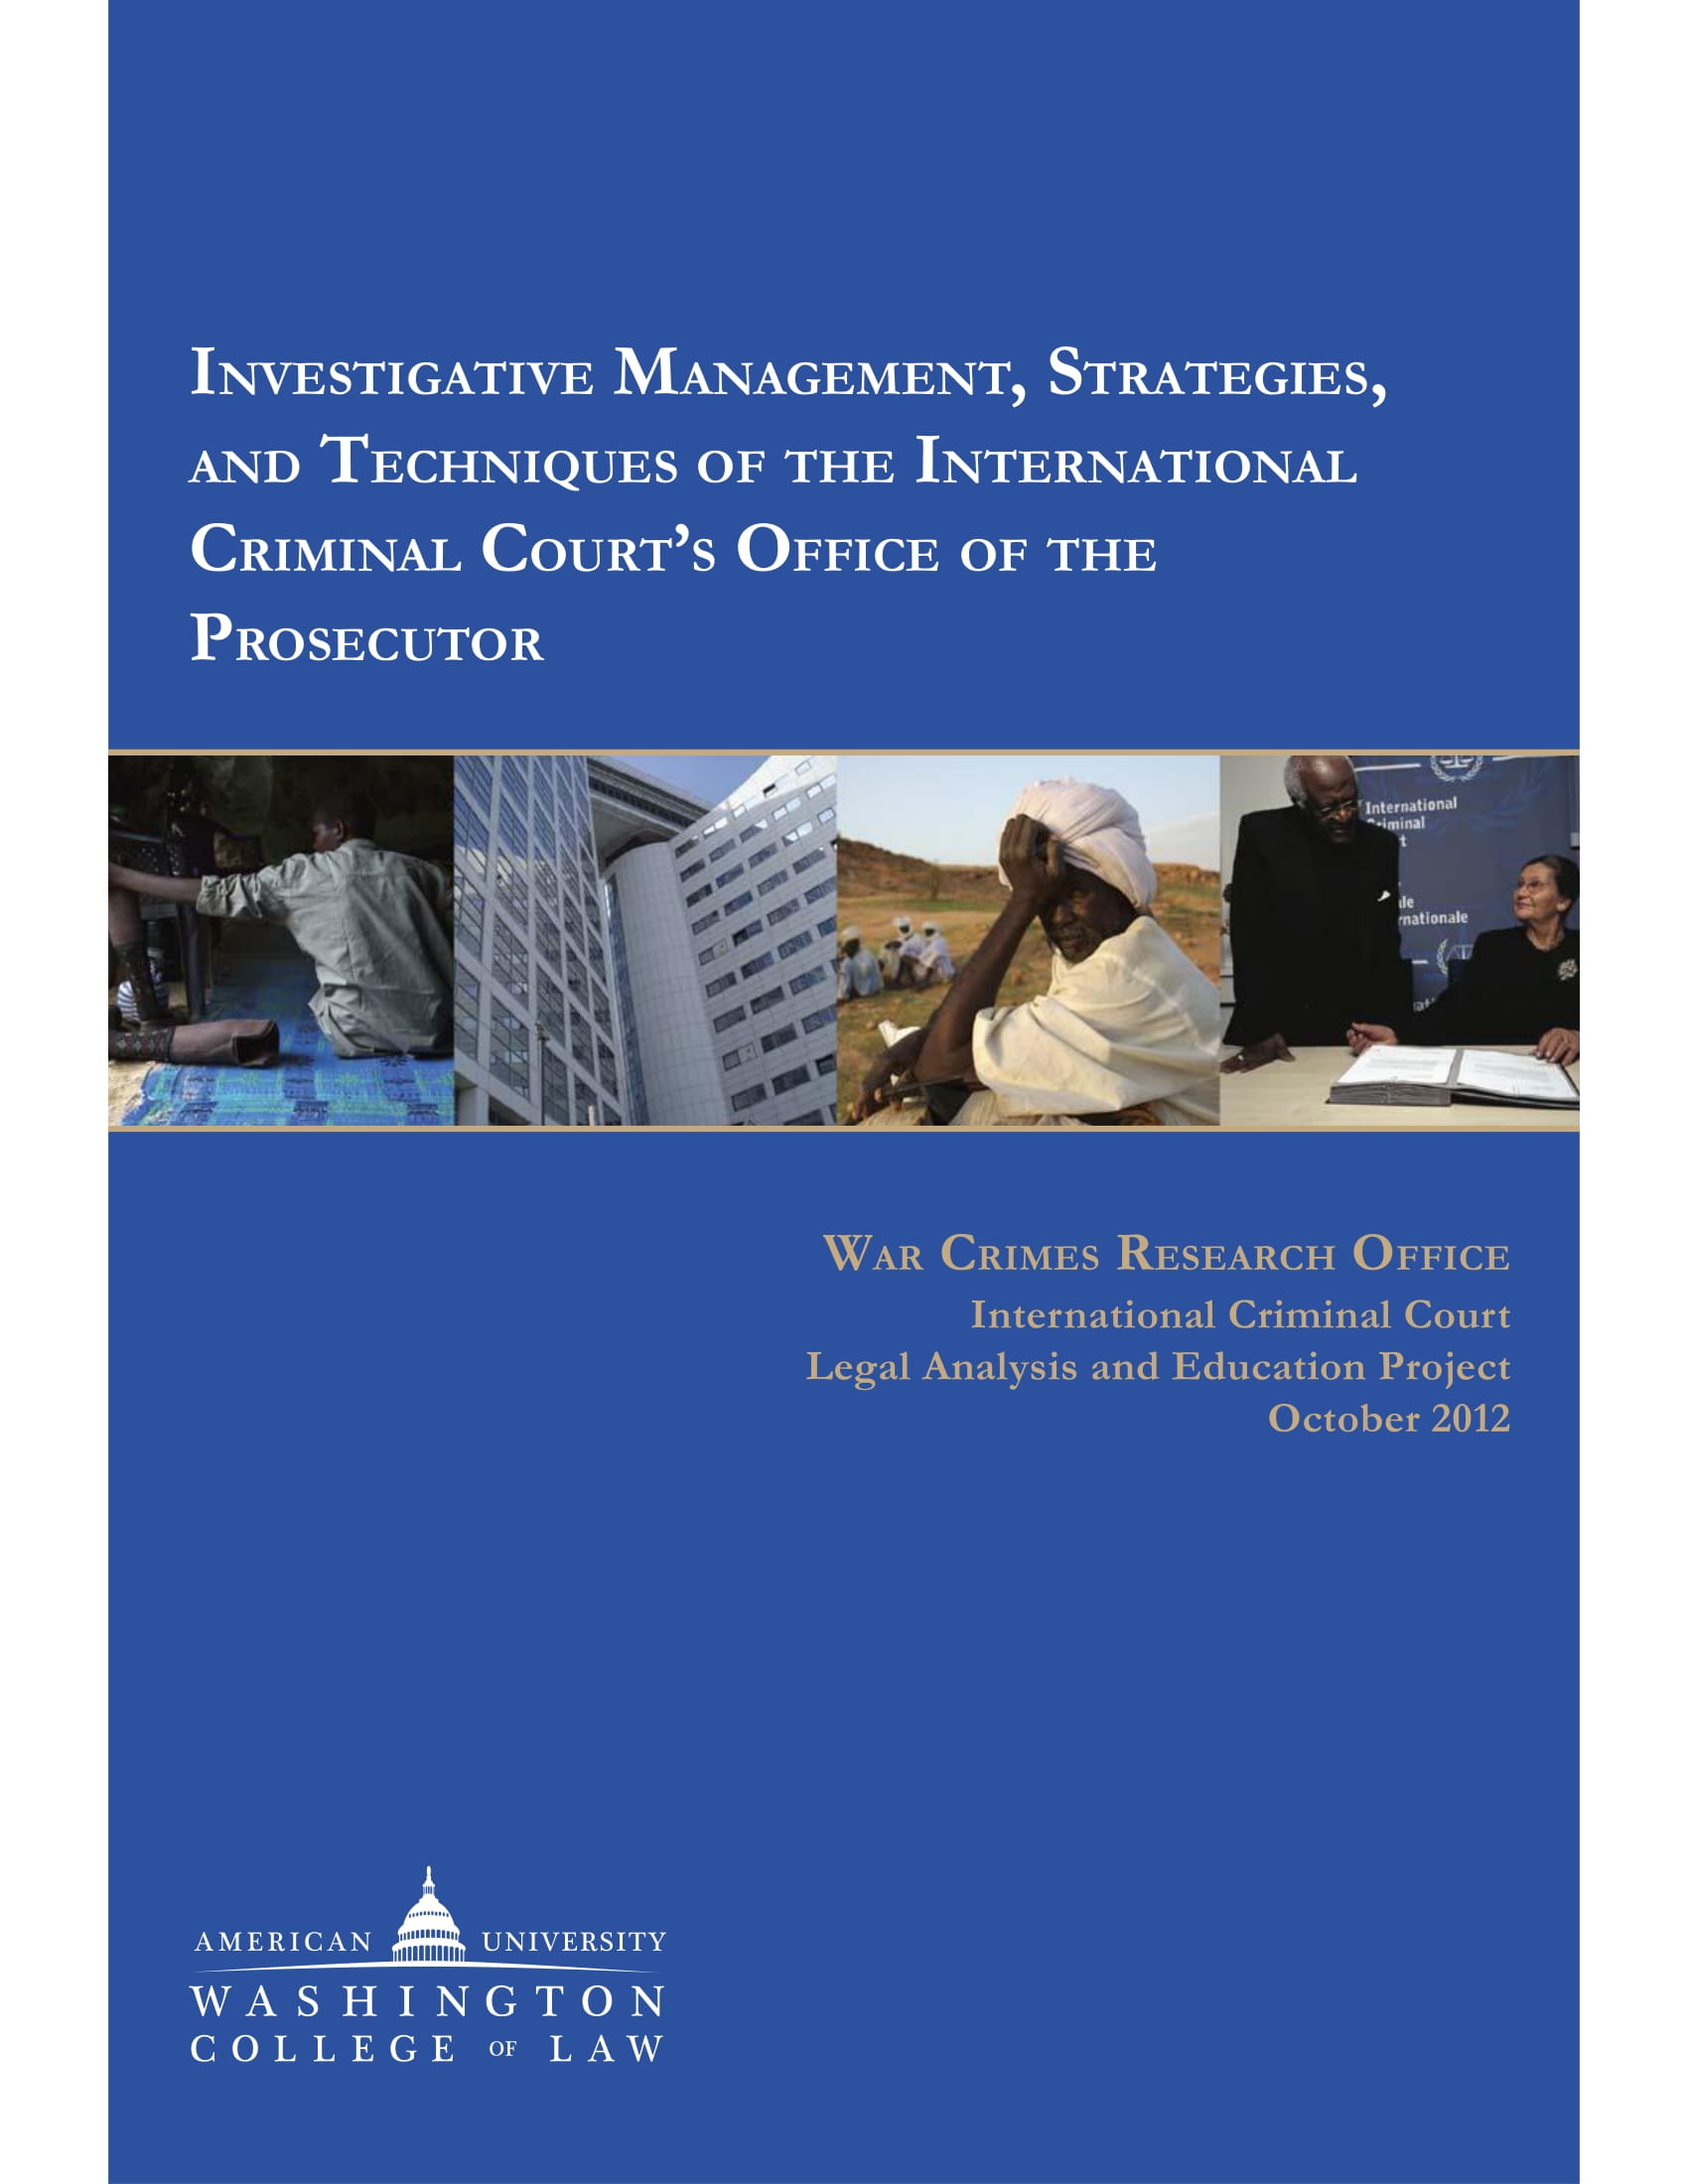 Report 16: Investigative Management, Strategies, and Techniques of the International Criminal Court’s Office of the Prosecutor